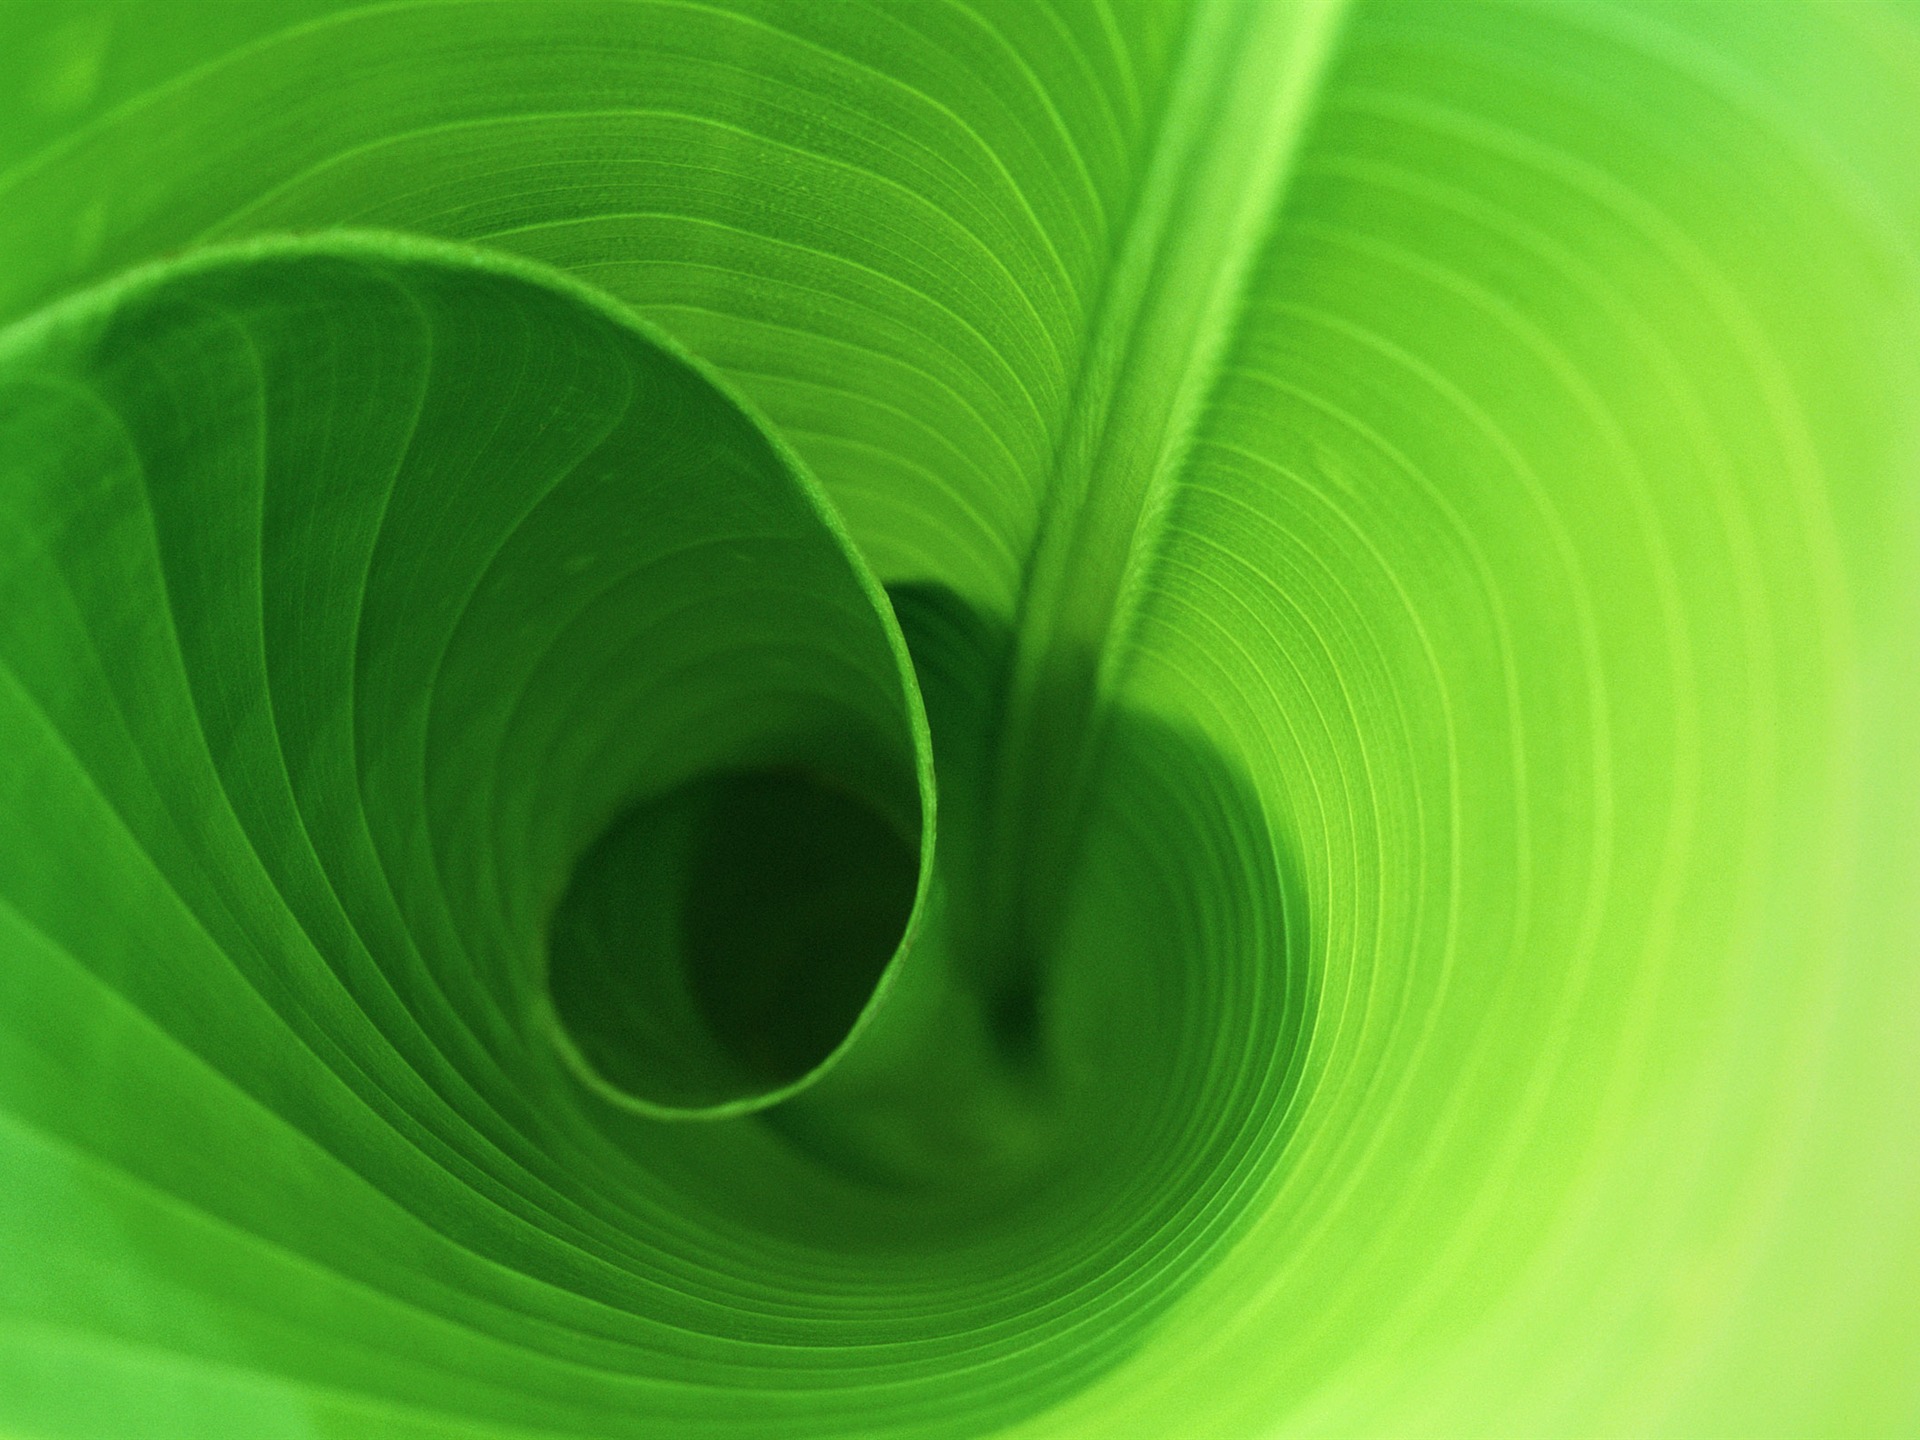 Large green leaves close-up flower wallpaper (2) #3 - 1920x1440